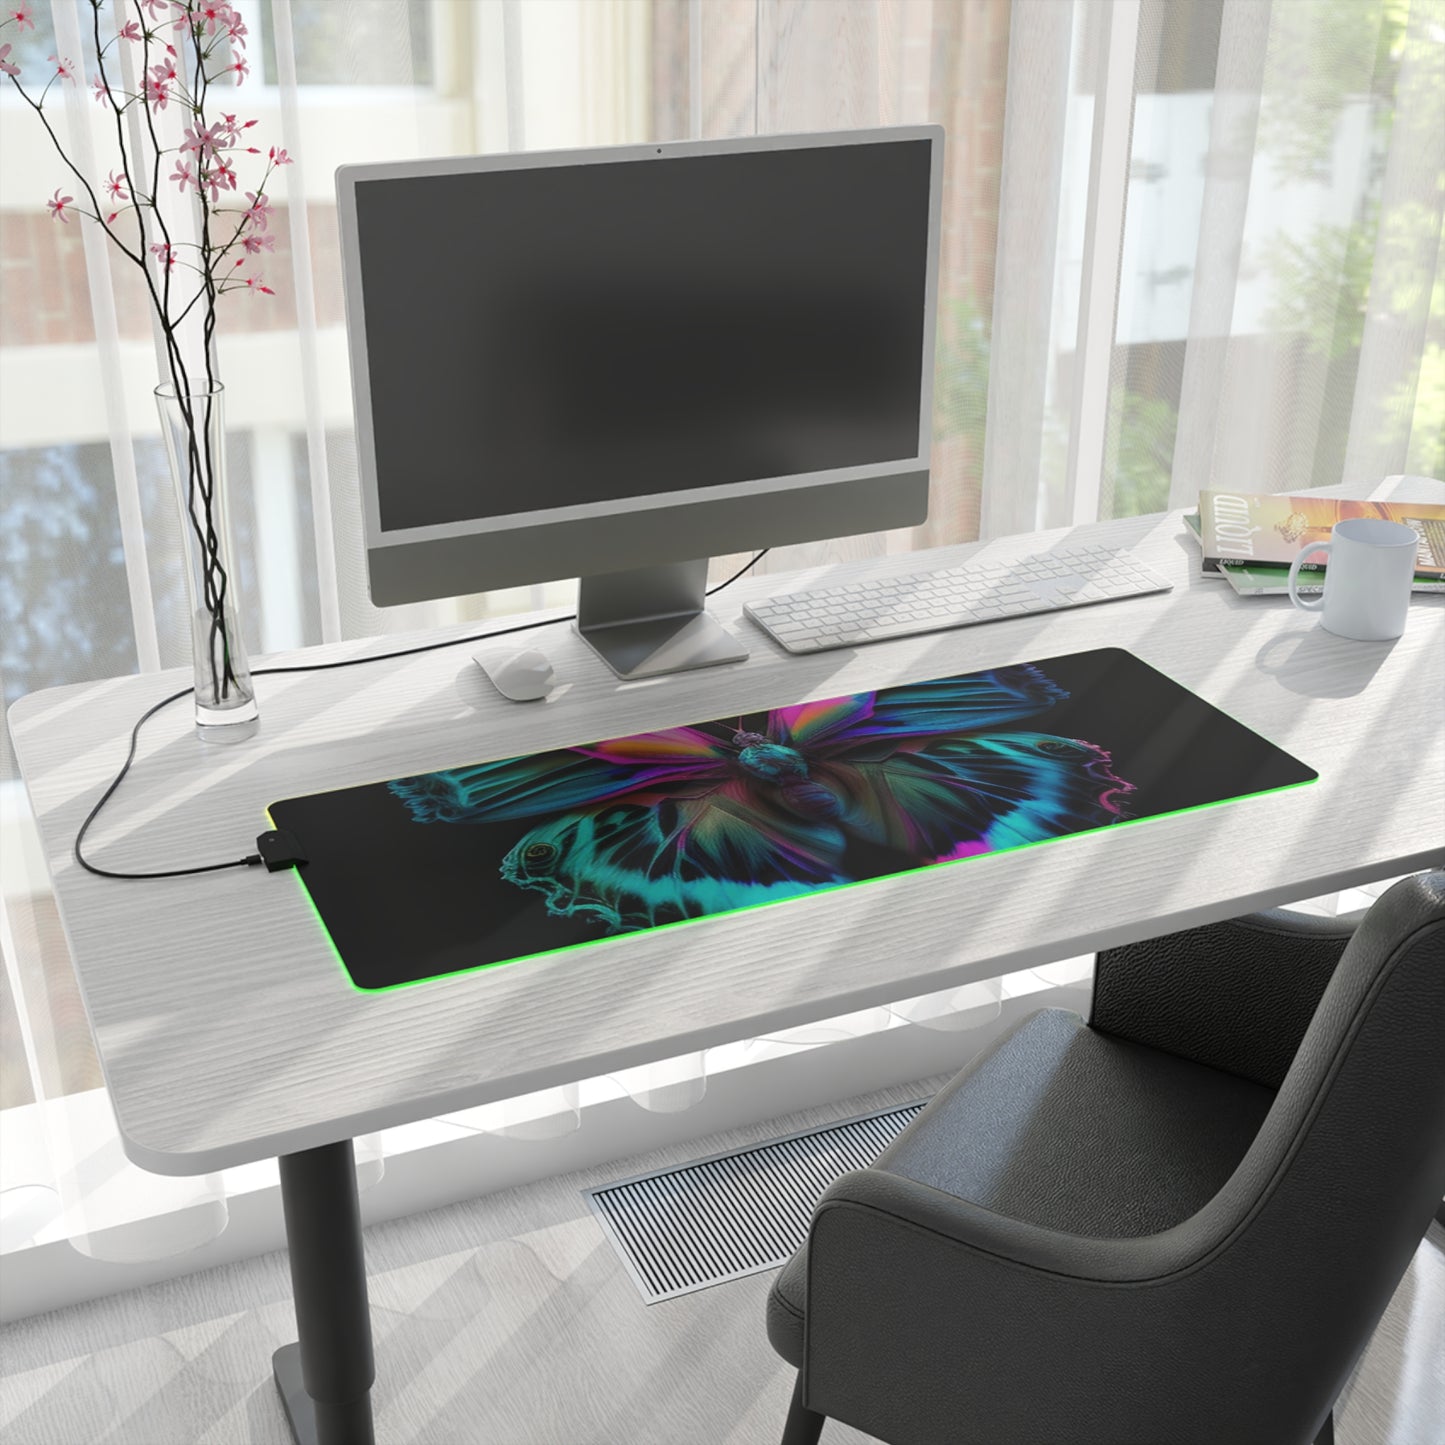 LED Gaming Mouse Pad Neon Butterfly Fusion 4